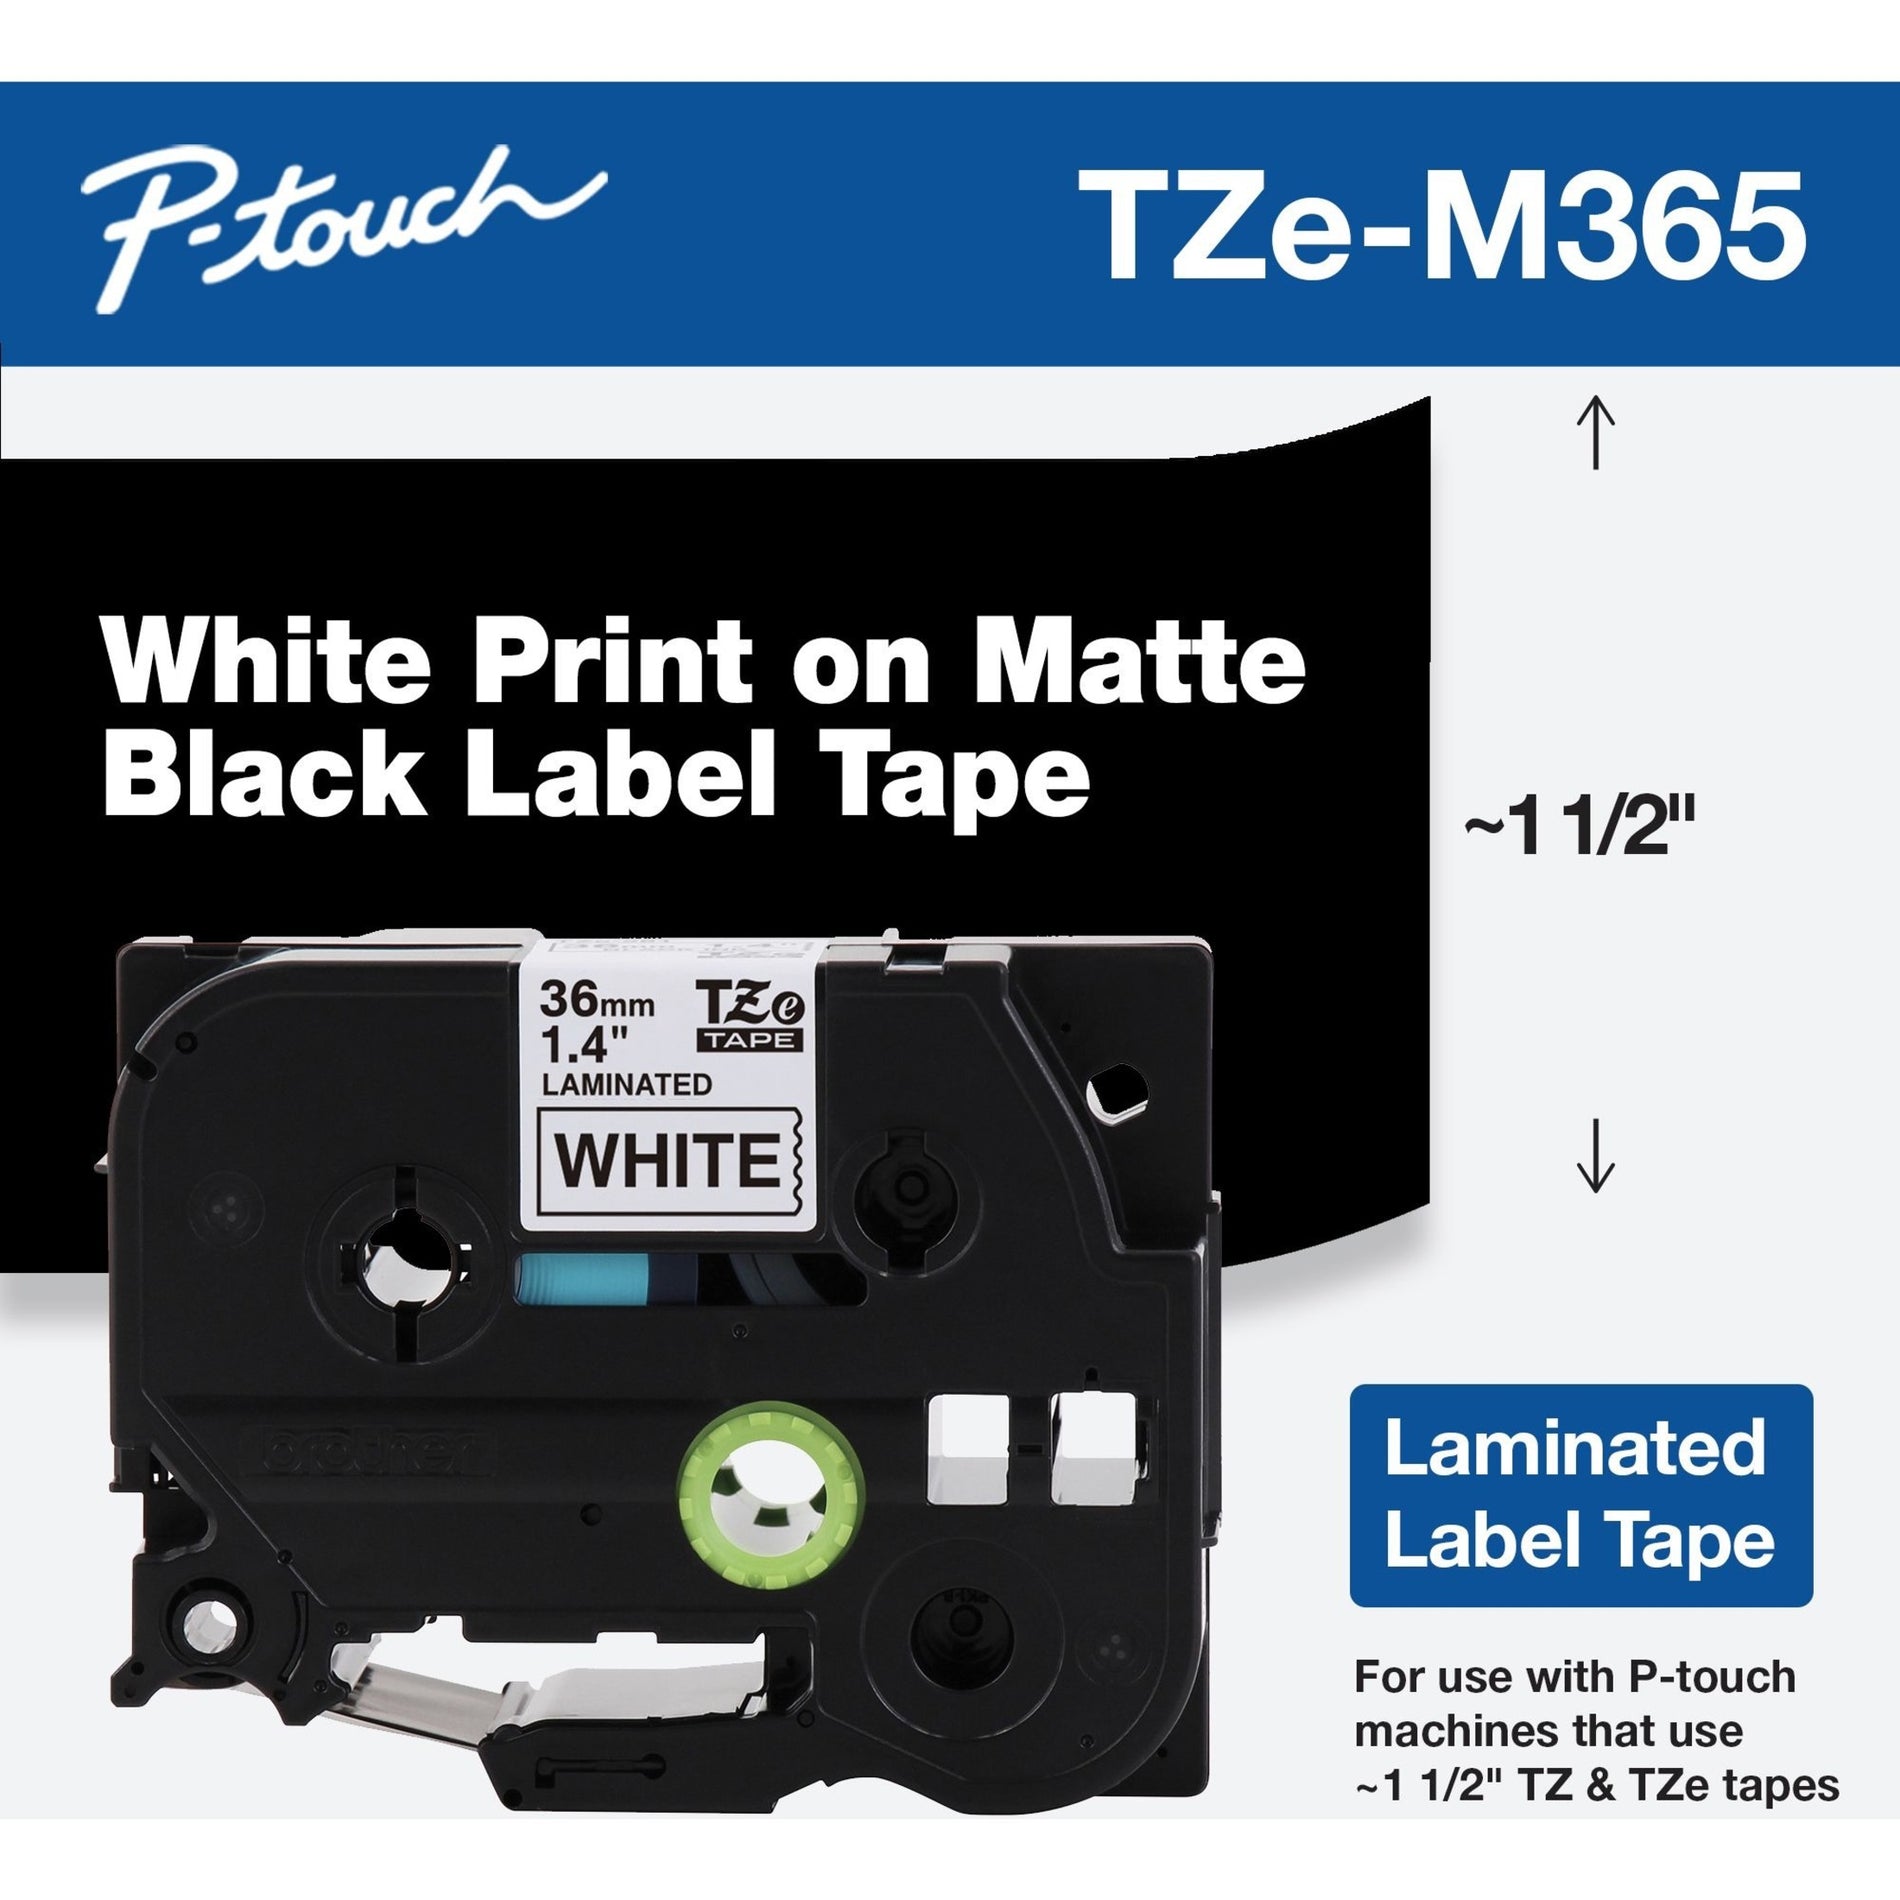 Brother TZEM365 P-touch TZe Label Tape, White on Matte Black, Strong Adhesive, Durable, Fade Resistant